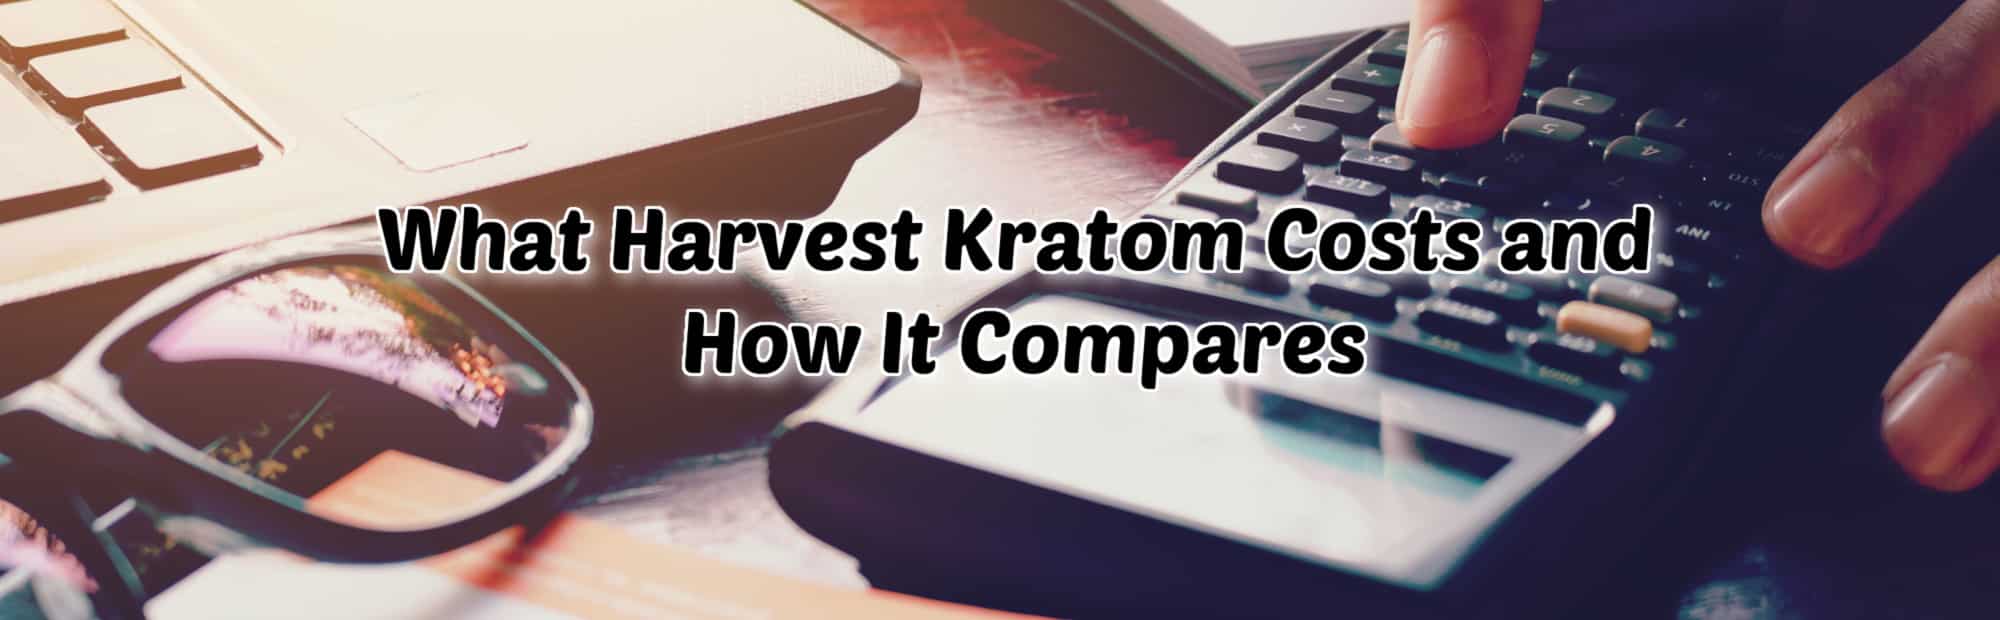 image of what harvest kratom cost and how it compares